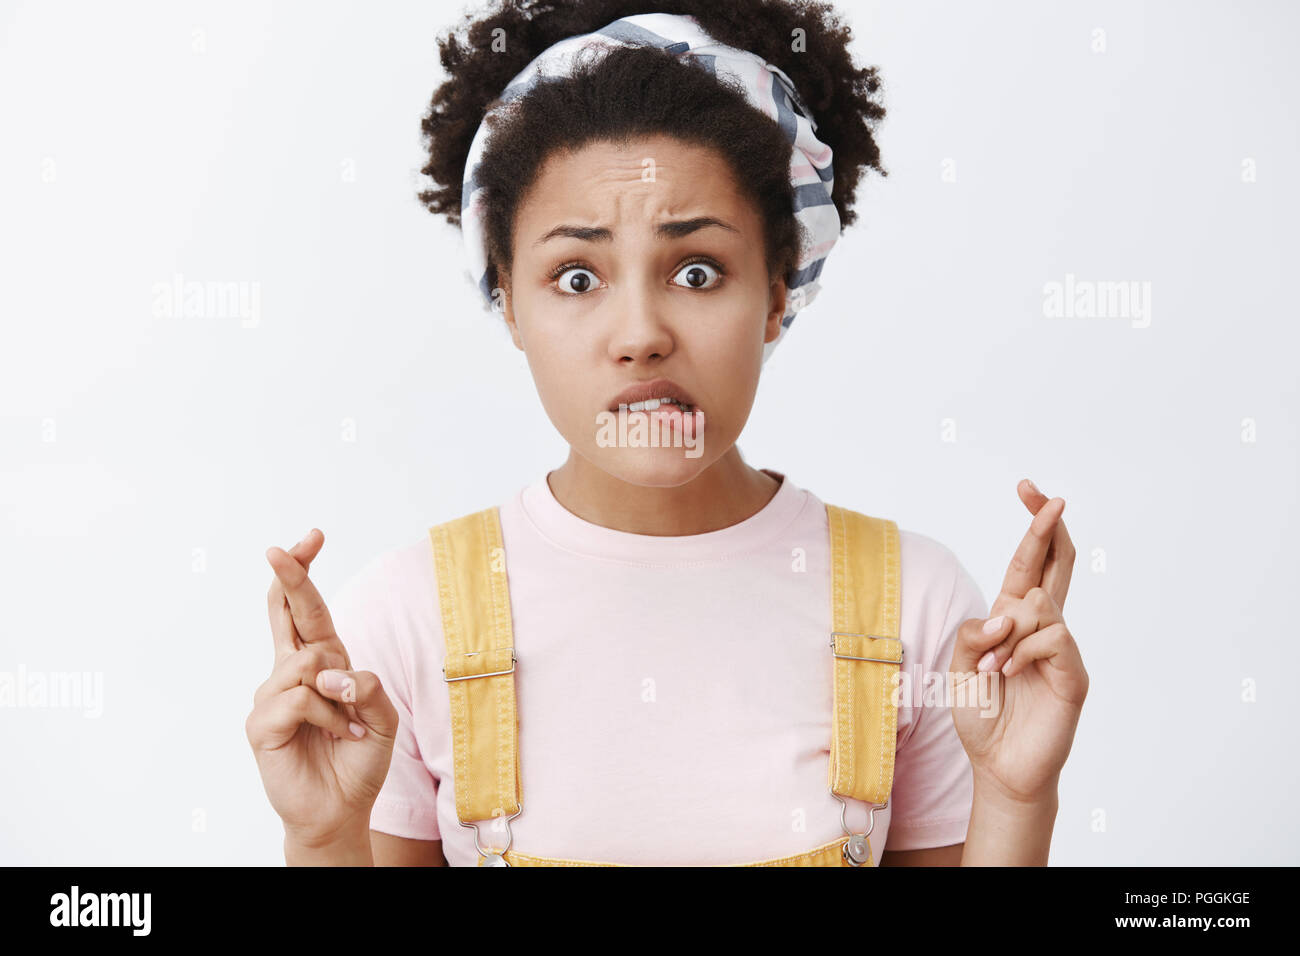 Girl prayes and hopes boyfriend will call after date. Portrait of worried intense charming dark-skinned female in dungarees and headband, biting lip and crossing fingers in hope gesture Stock Photo